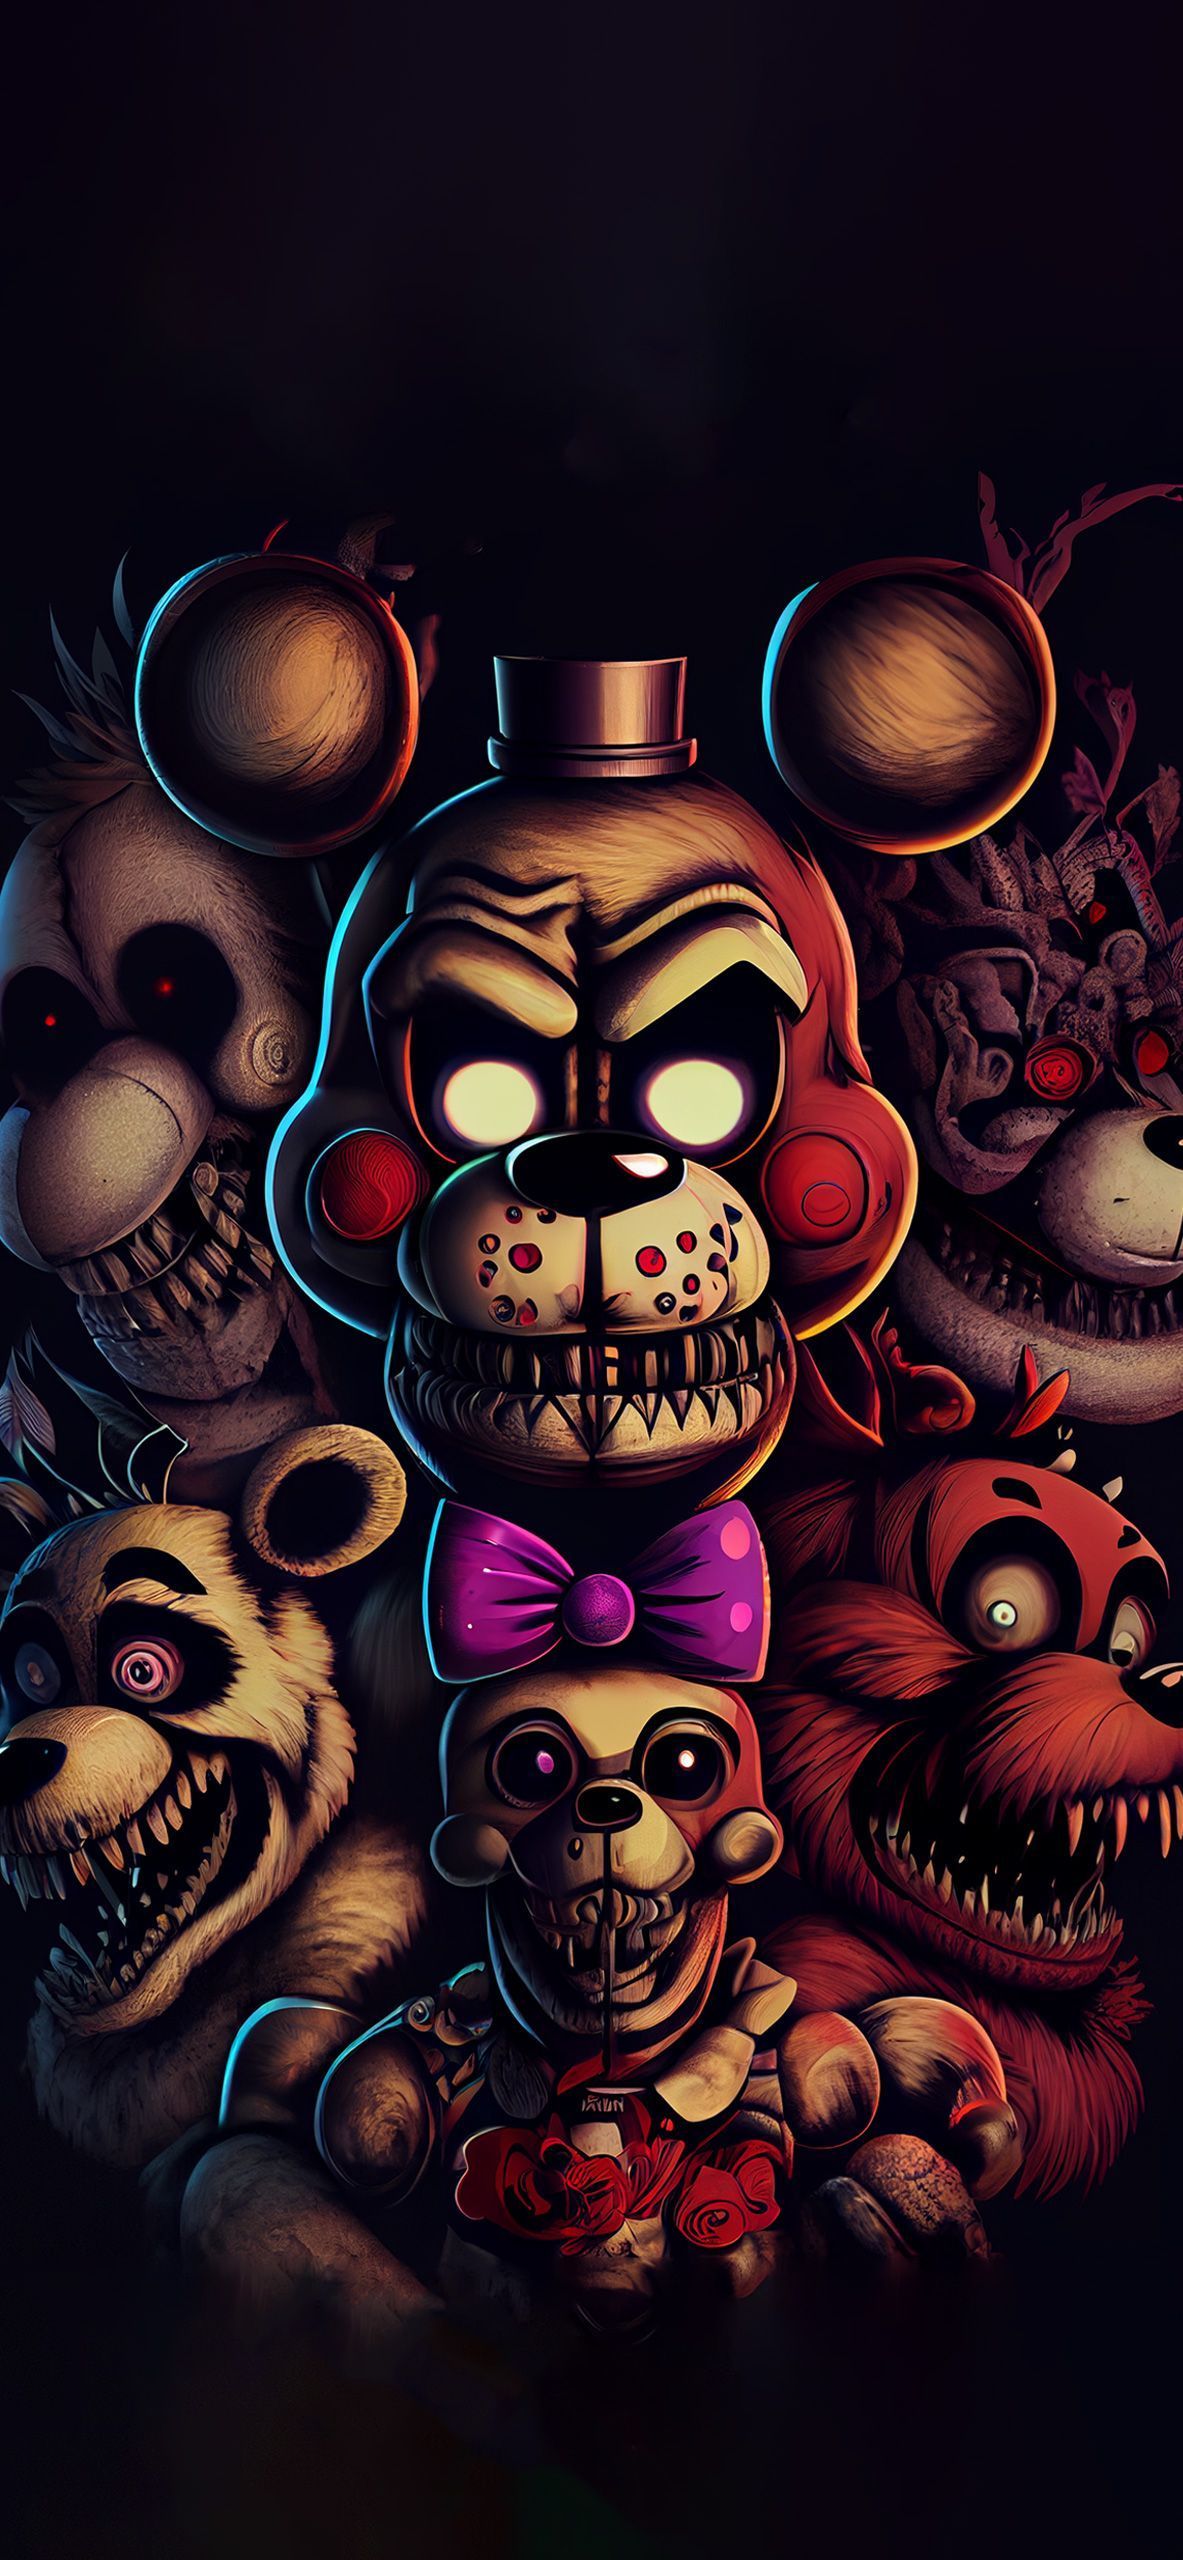 Scary FNaF Wallpaper Nights at Freddy's Wallpaper iPhone